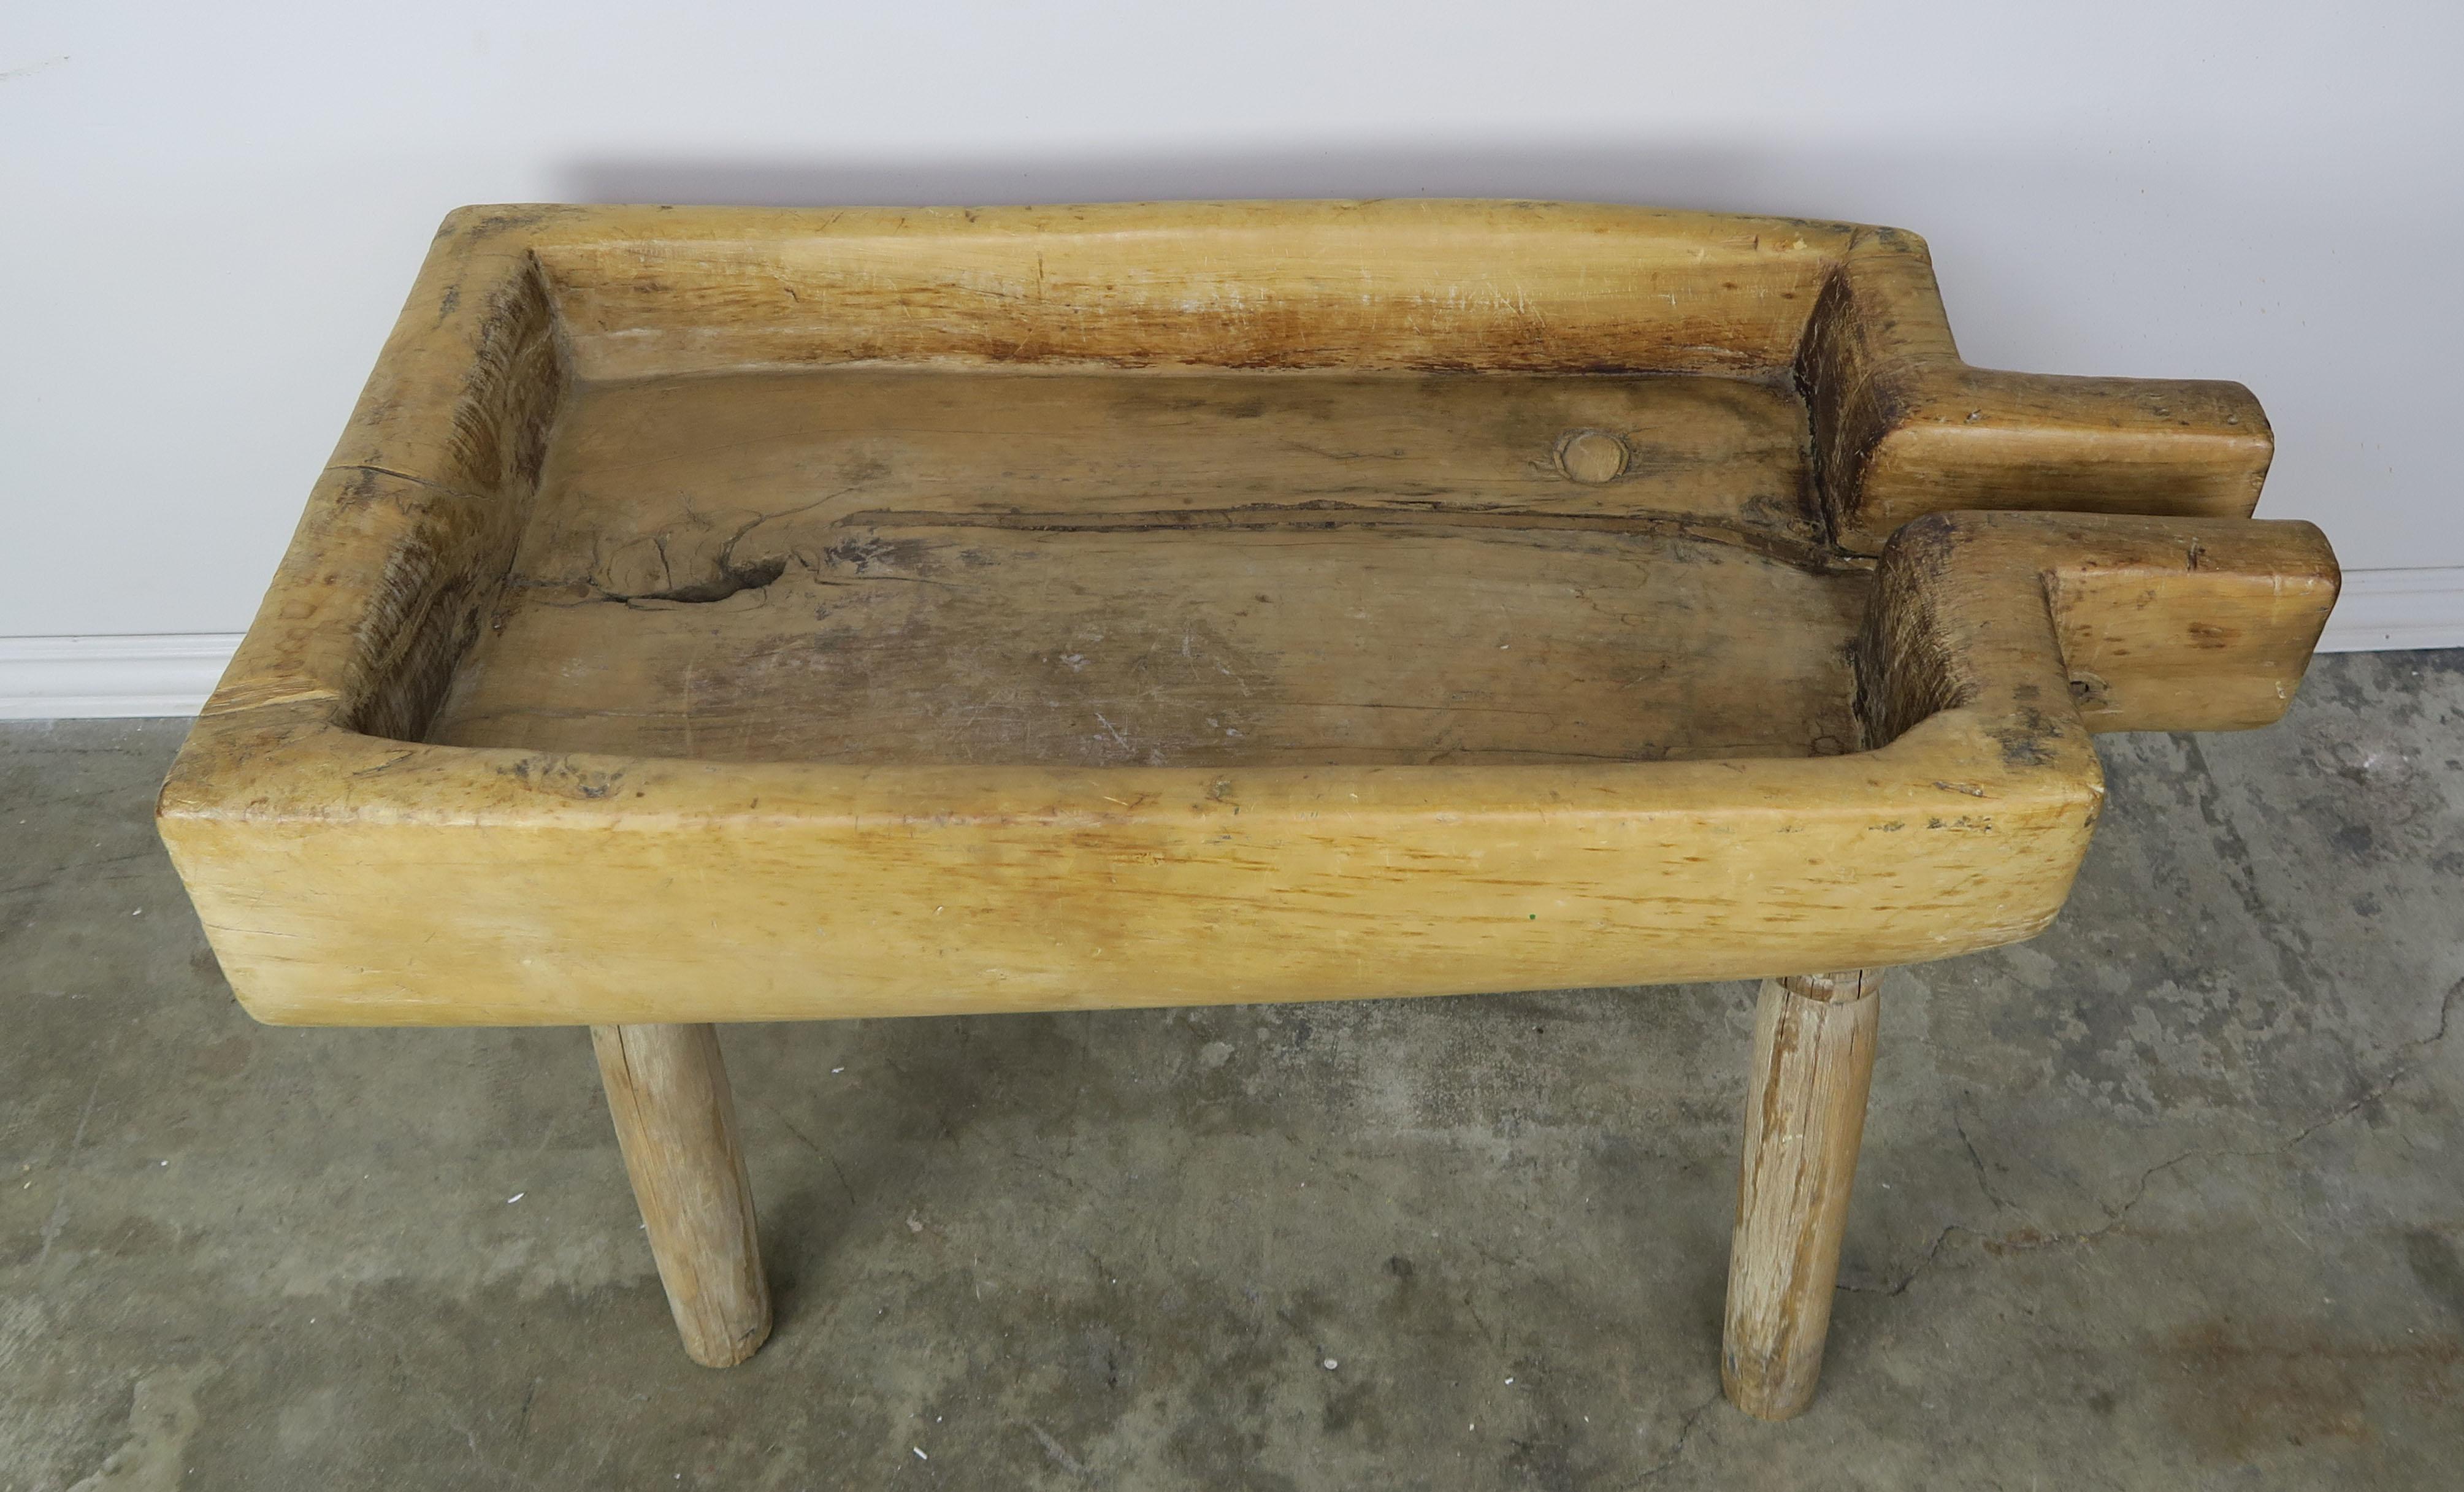 19th century wood trough with spout standing on four straight legs. Great accent table or storage for wood, etc.